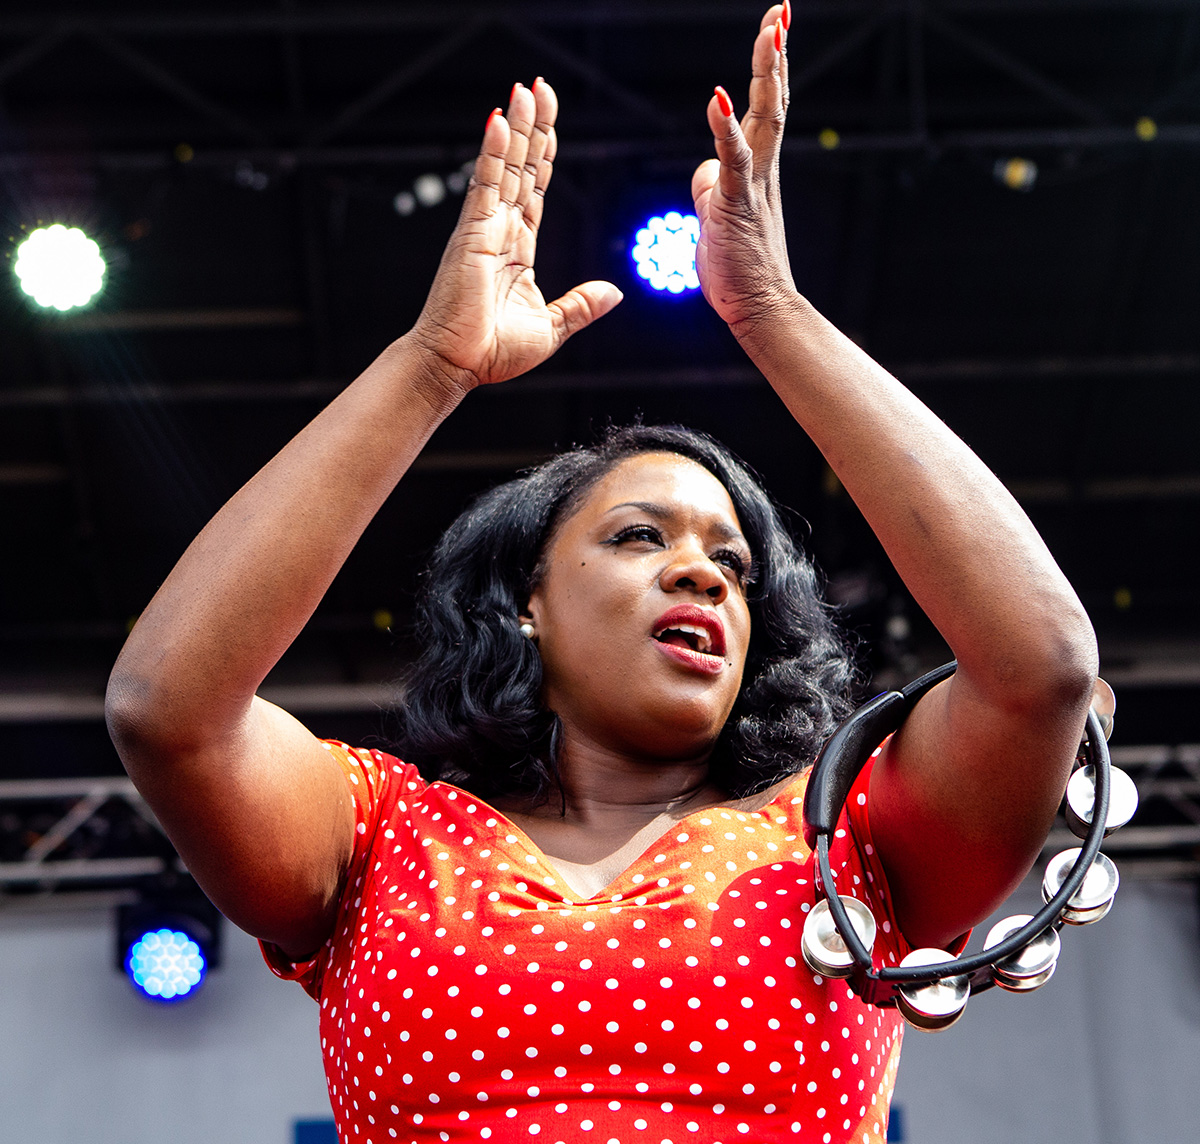 A photo of Tanya Trotter of The War in Treaty from Bristol Rhythm 2018. Her hands are in the air above her head and she appears to be clapping to the music on stage.